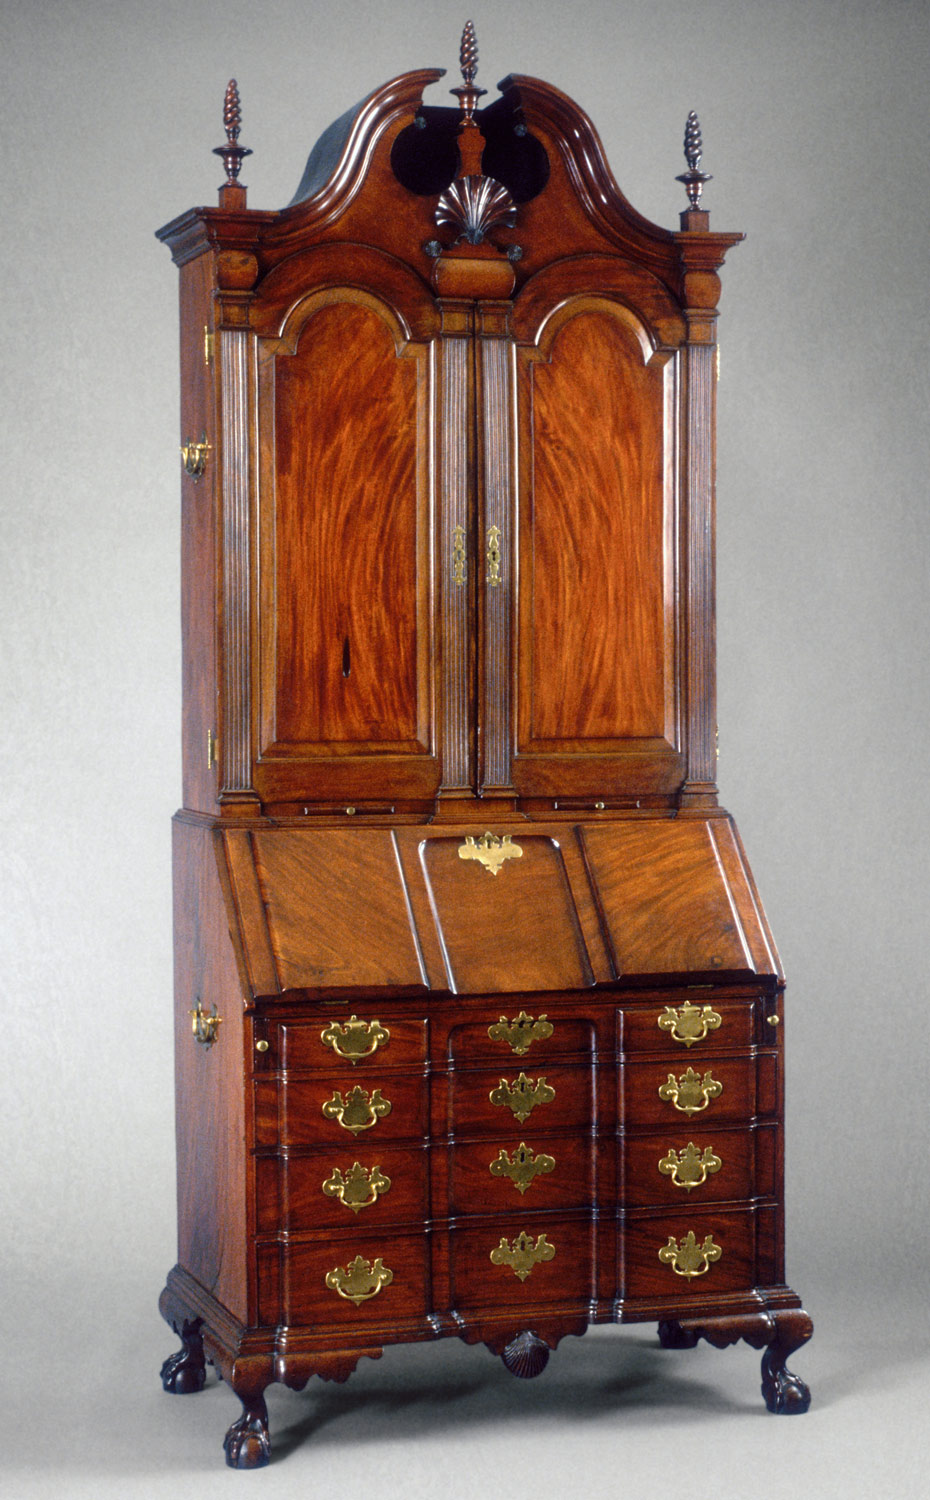 American Furniture, 1730–1790: Queen Anne and Chippendale Styles